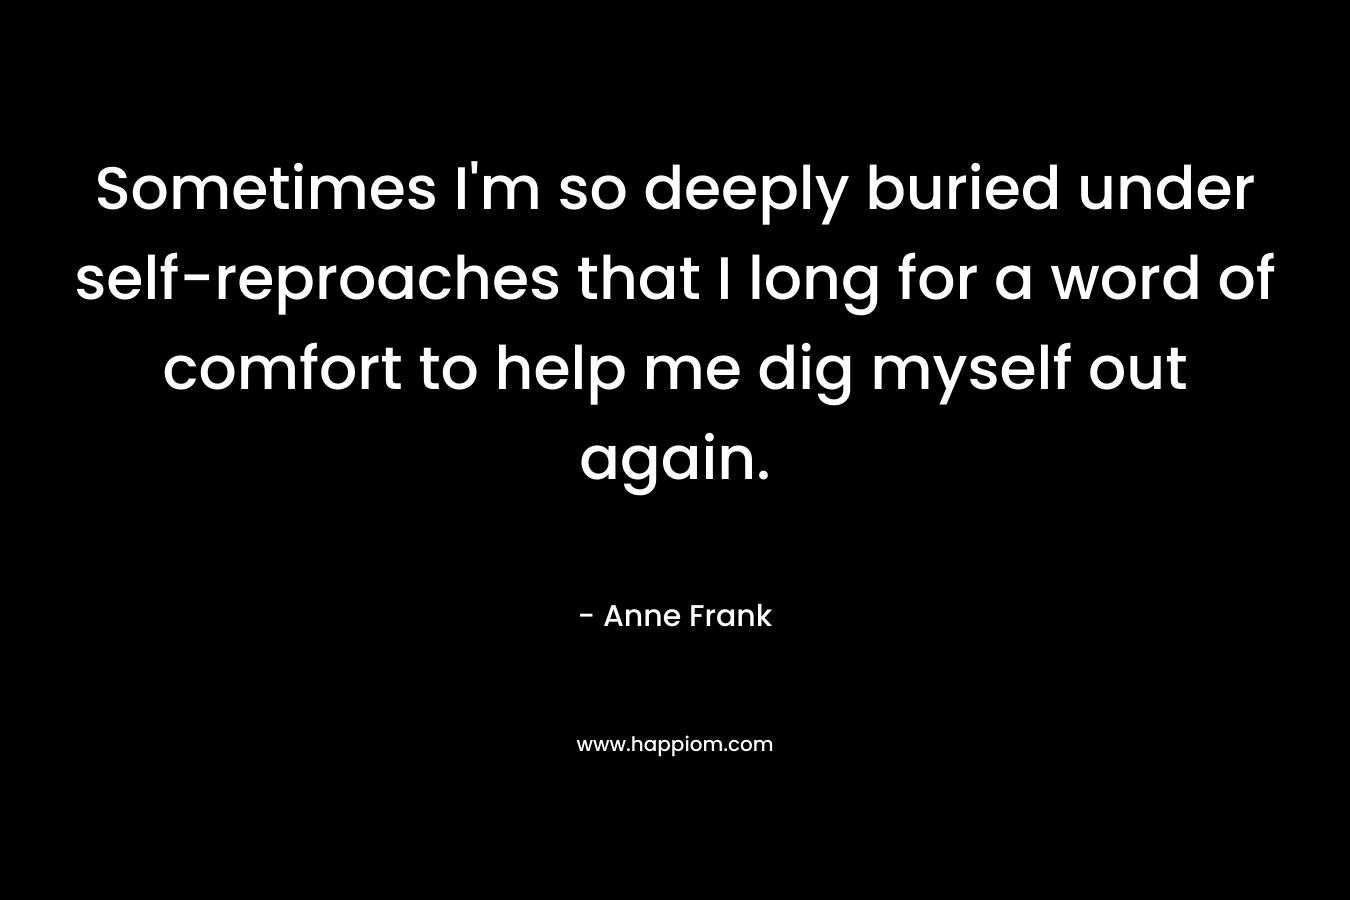 Sometimes I’m so deeply buried under self-reproaches that I long for a word of comfort to help me dig myself out again. – Anne Frank